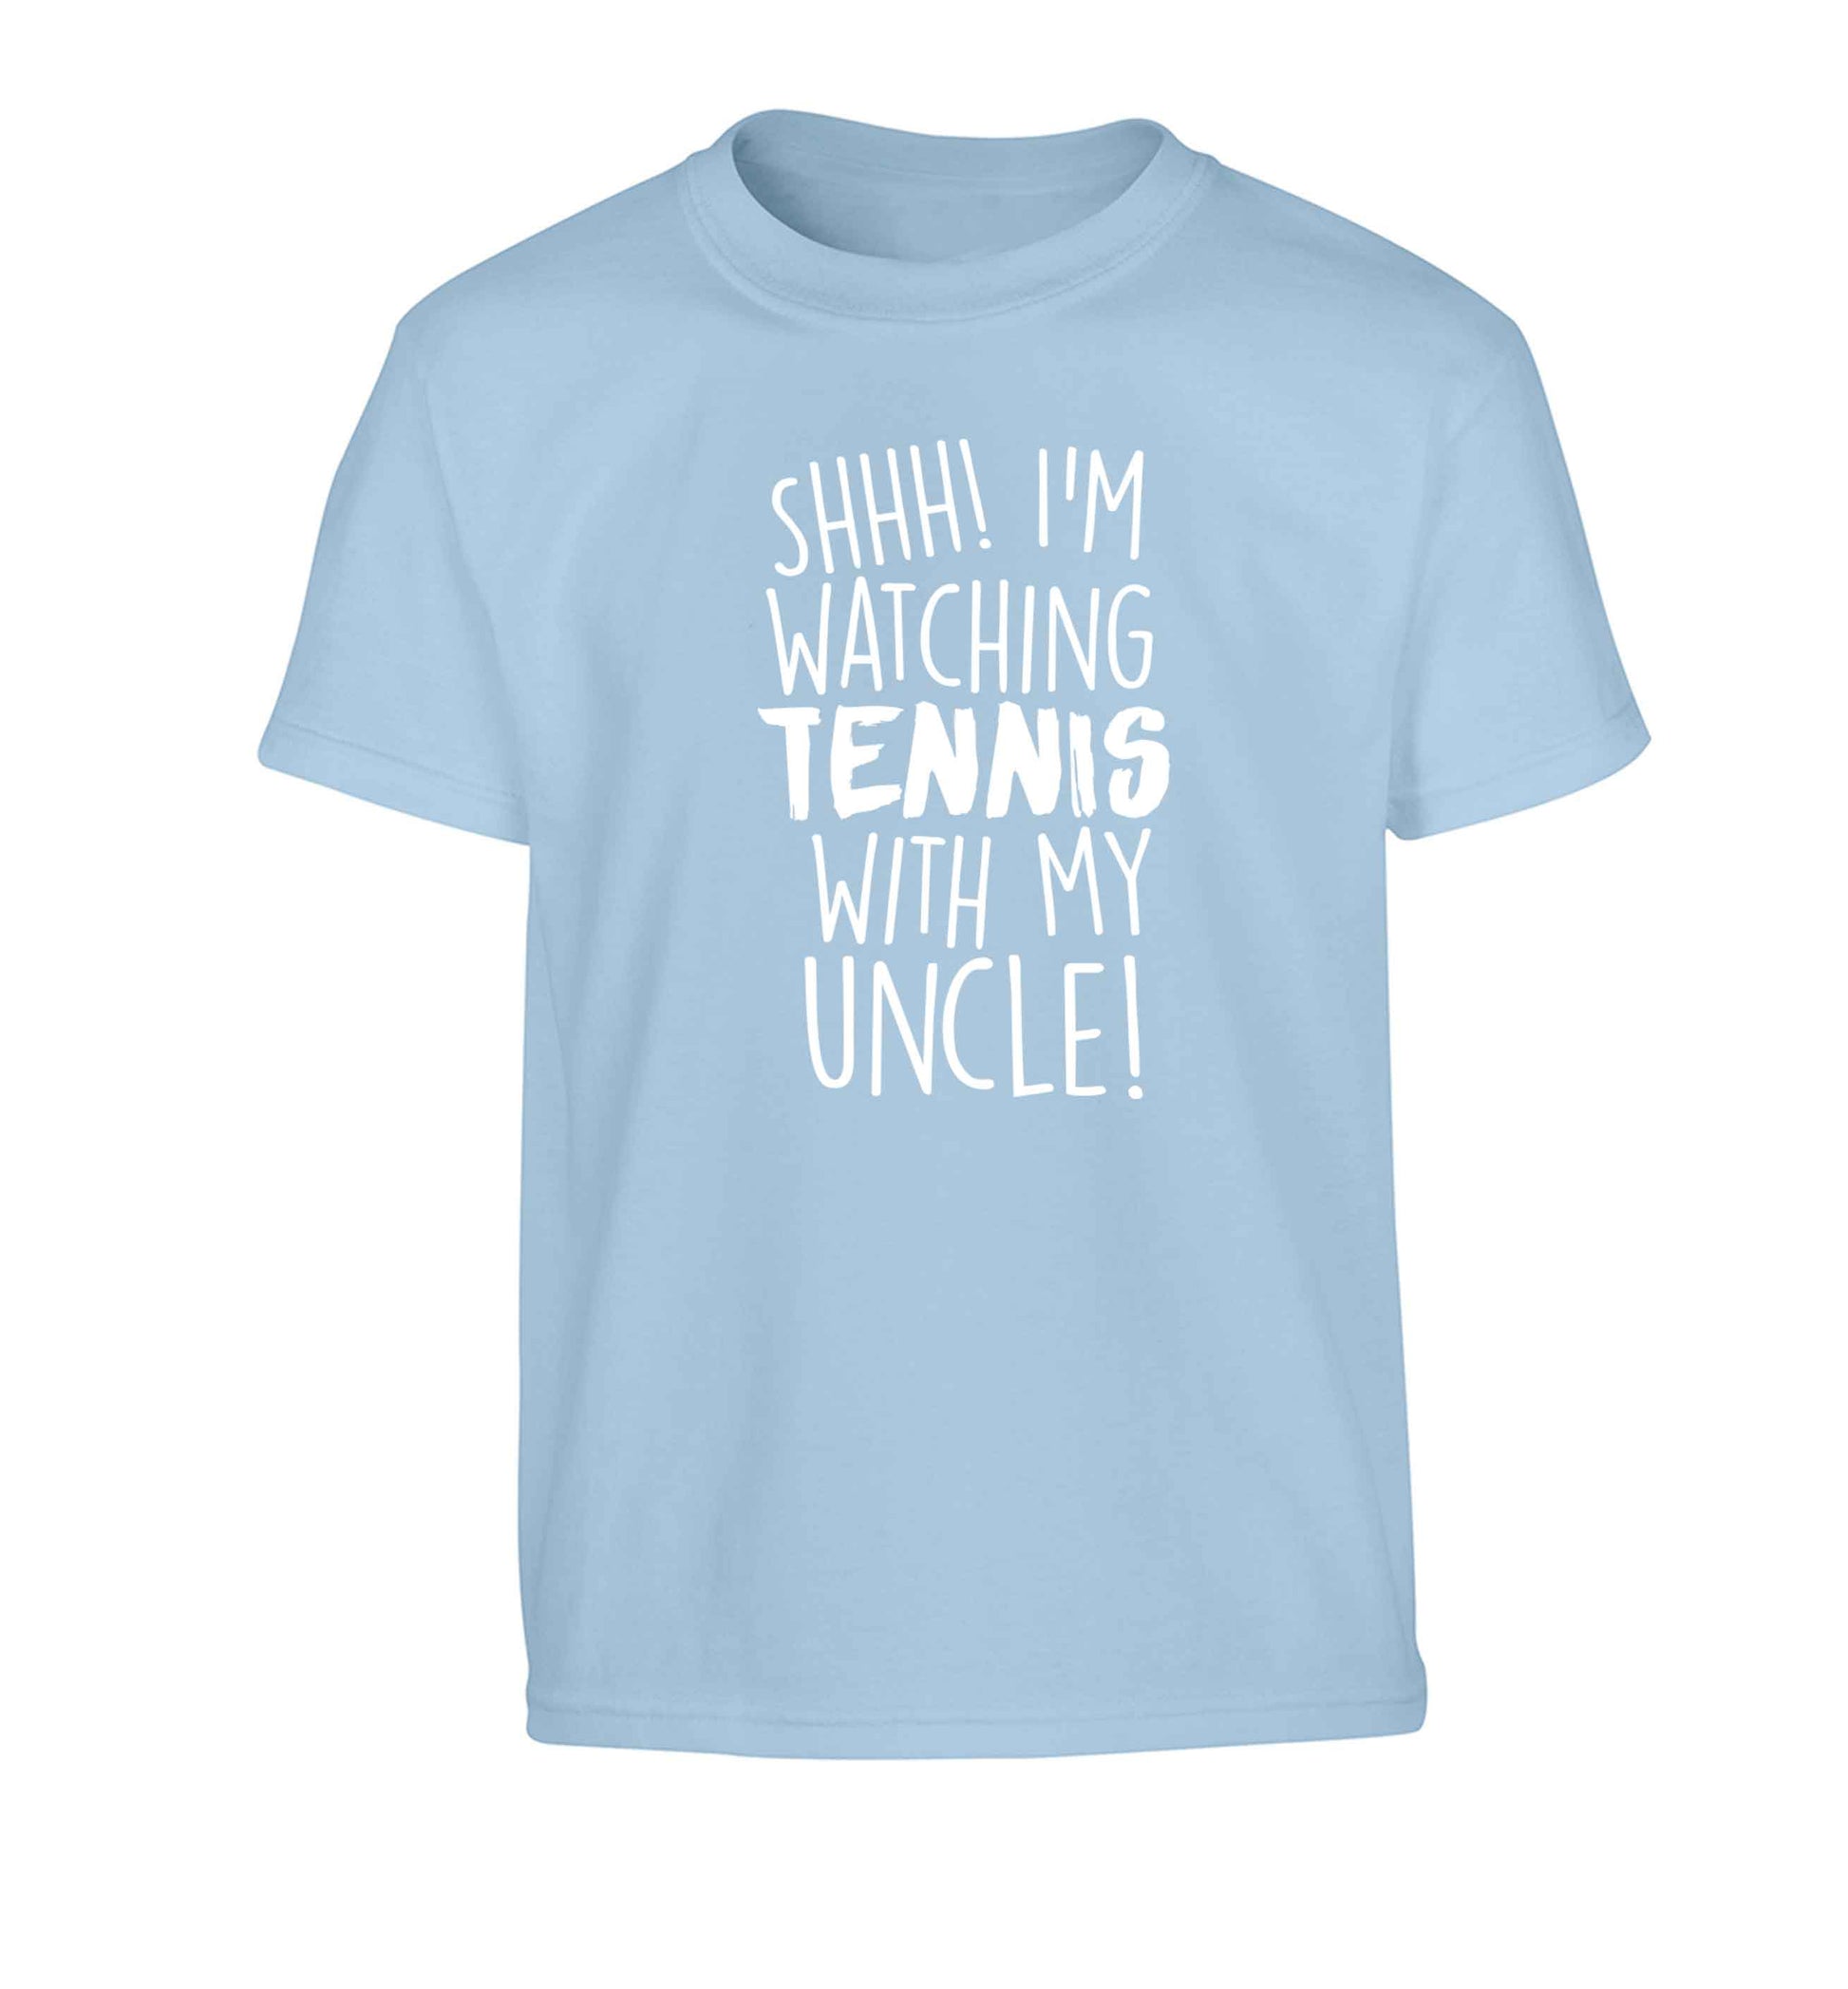 Shh! I'm watching tennis with my uncle! Children's light blue Tshirt 12-13 Years